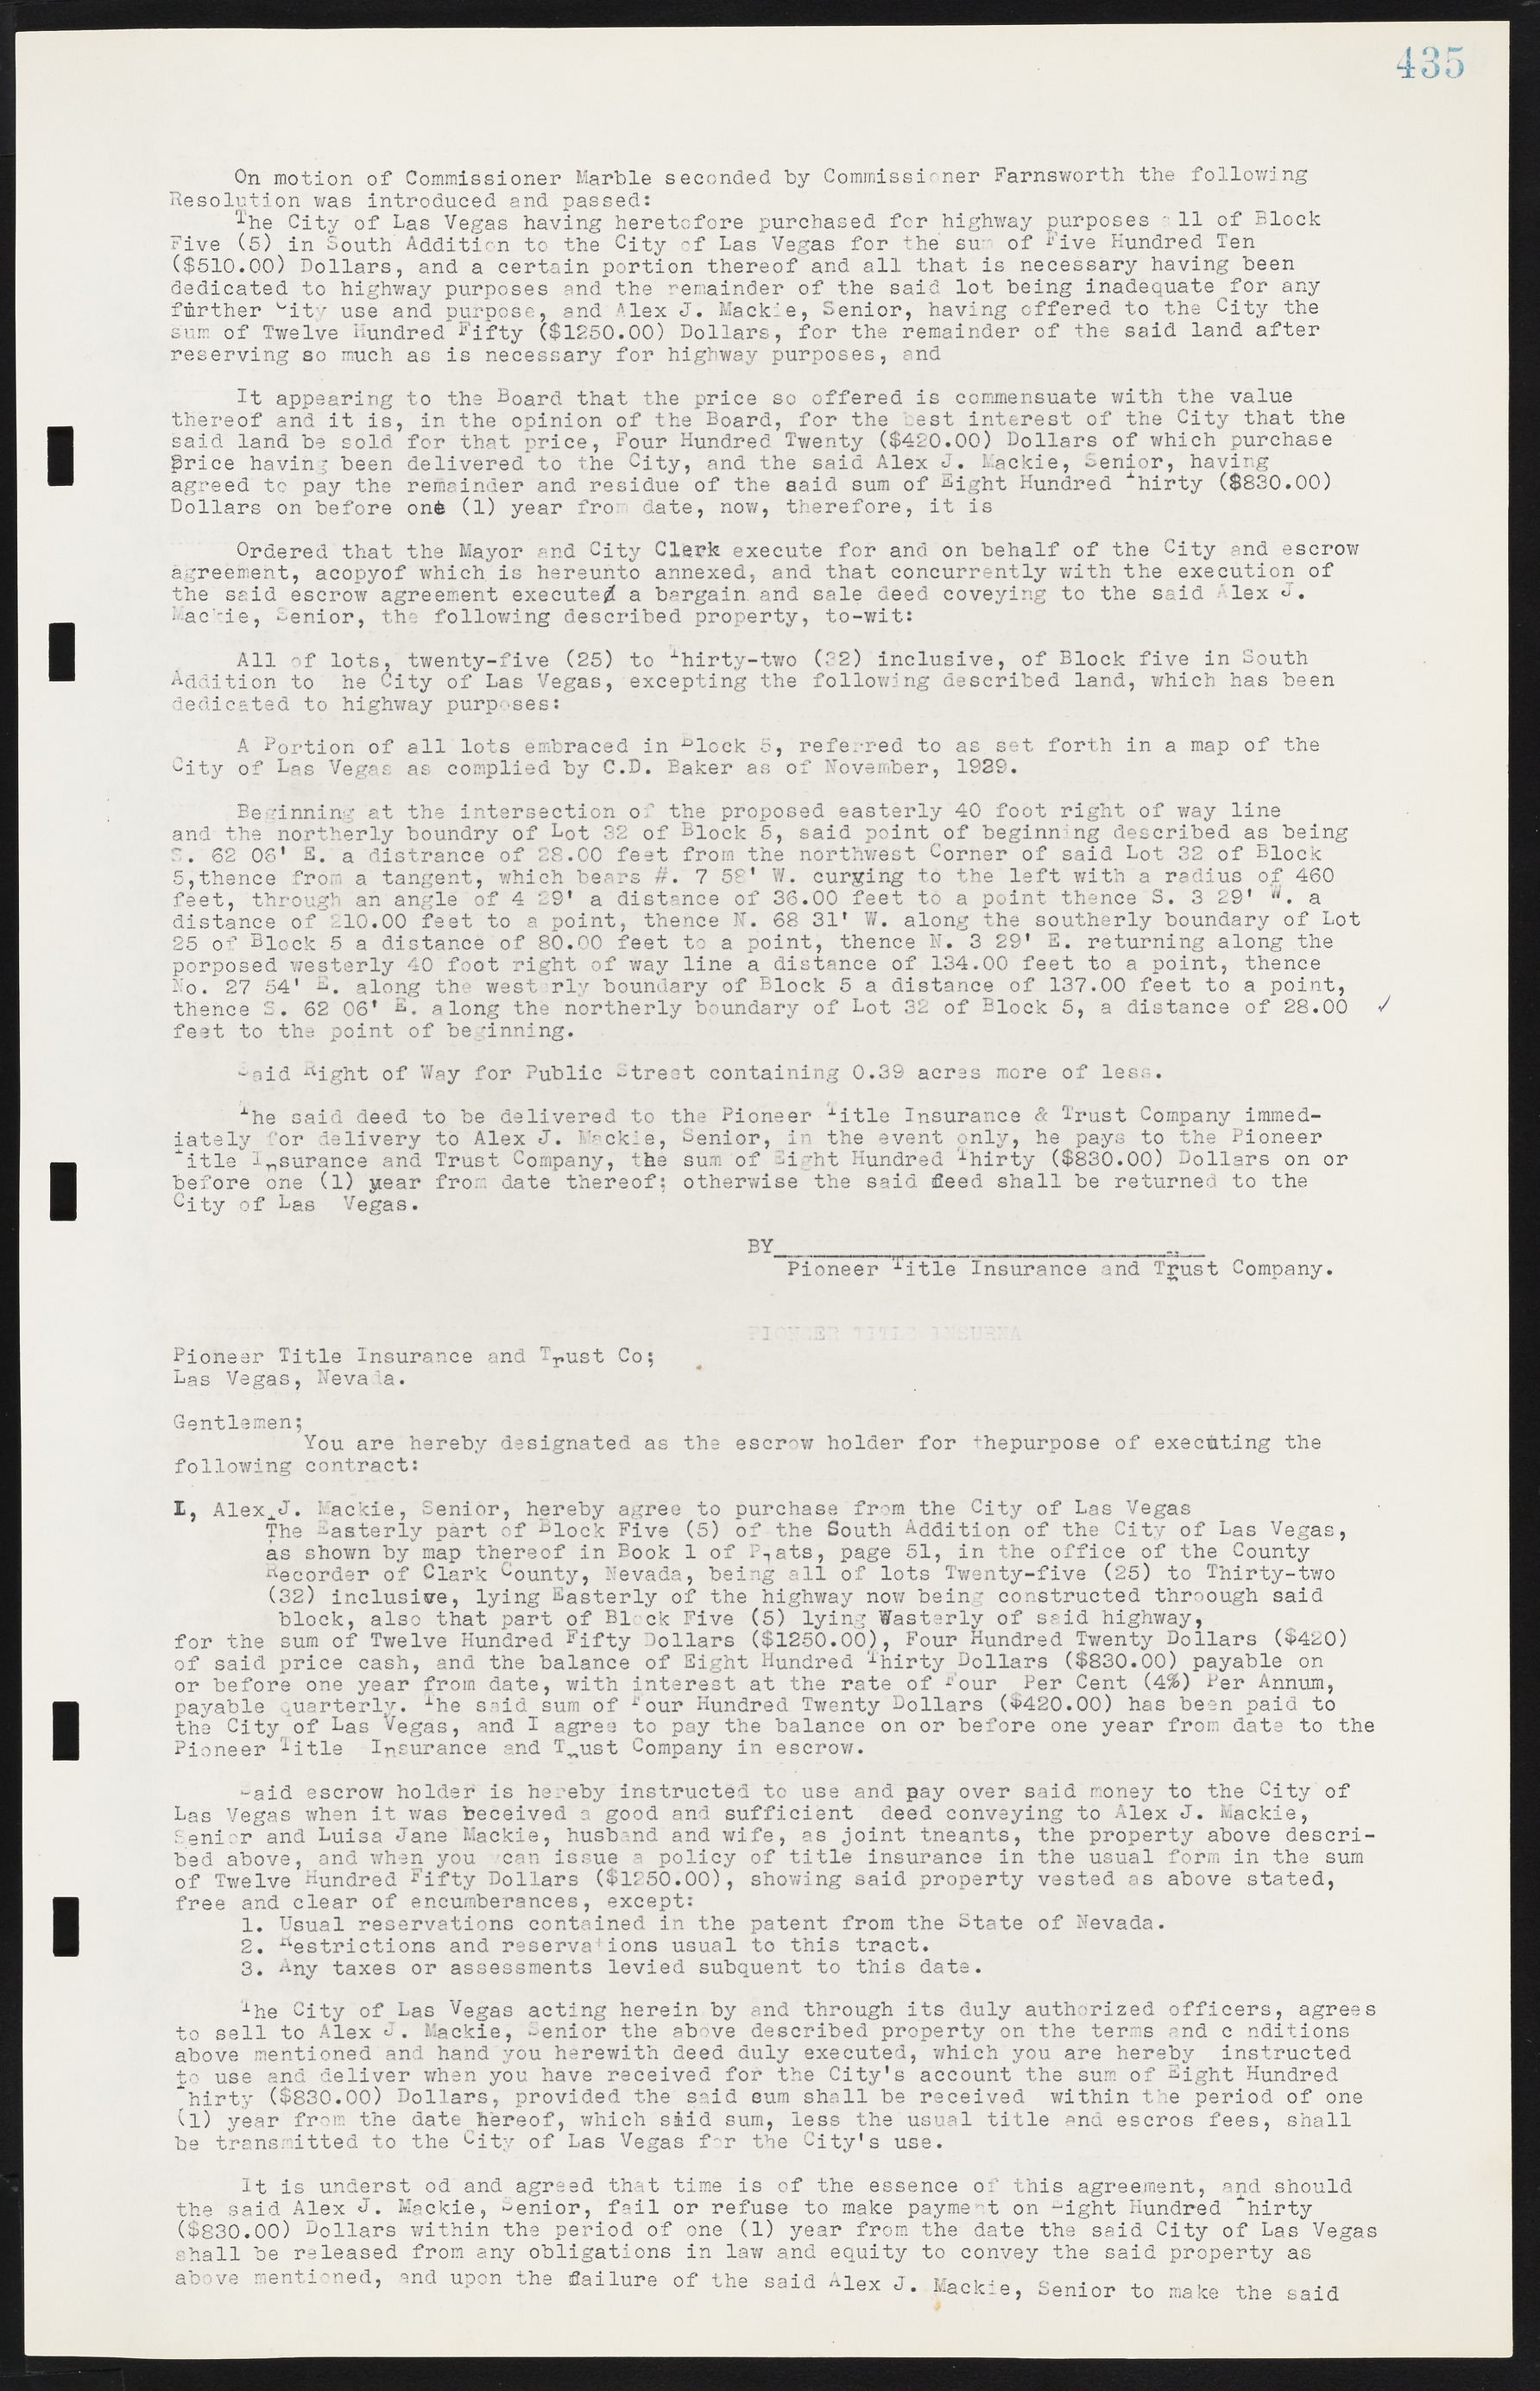 Las Vegas City Commission Minutes, May 14, 1929 to February 11, 1937, lvc000003-442